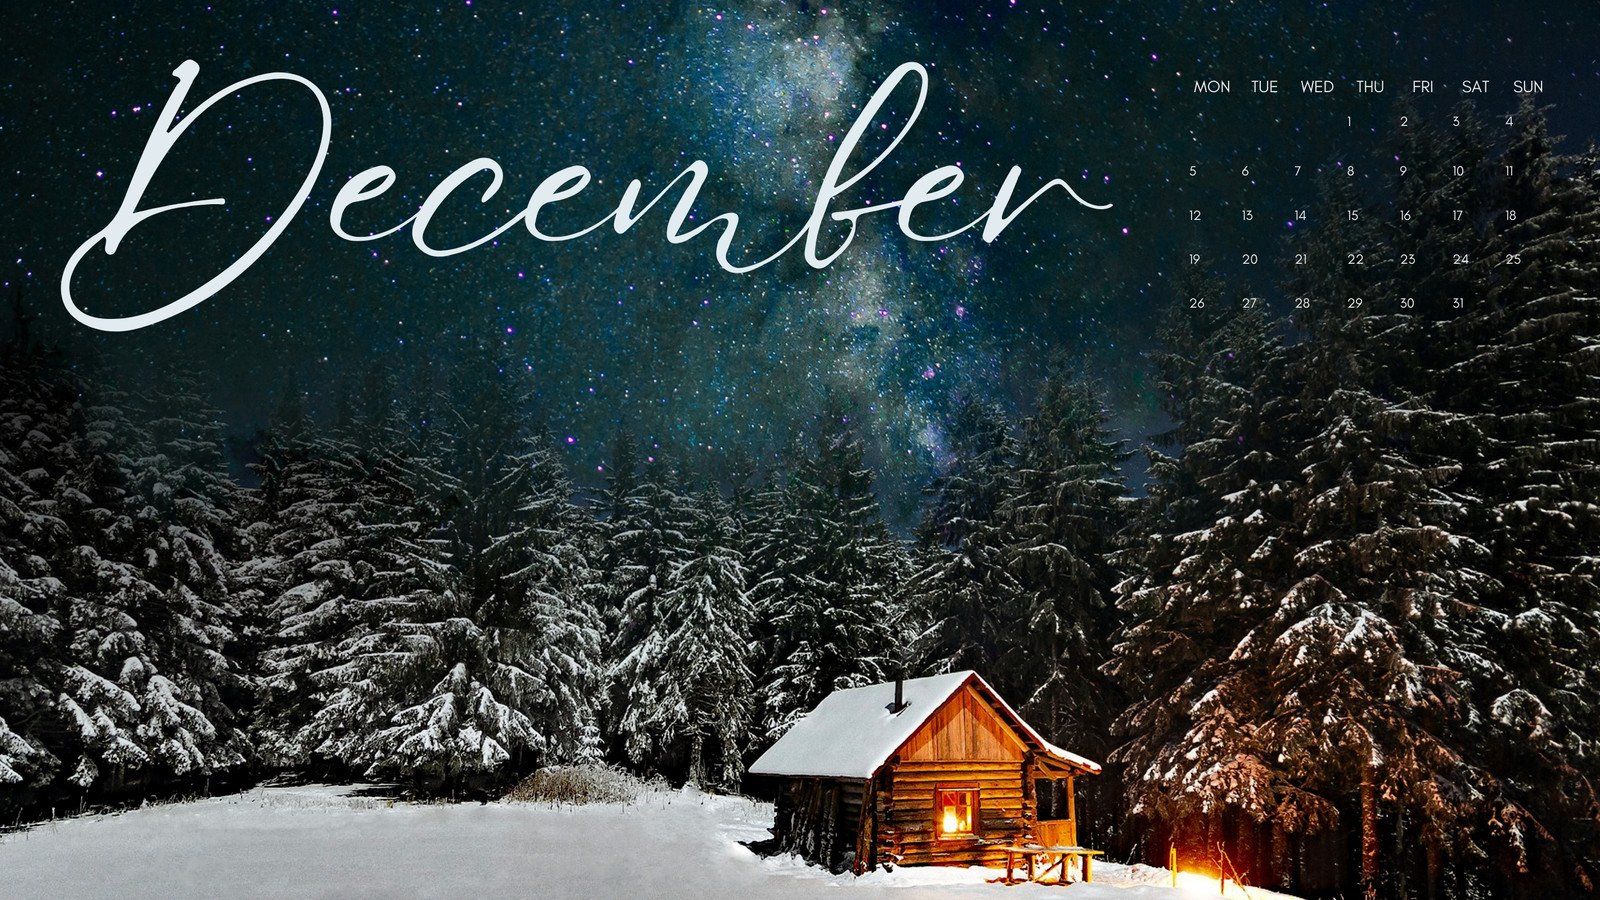 The december 2019 calendar with a cabin in snow - Snow, winter